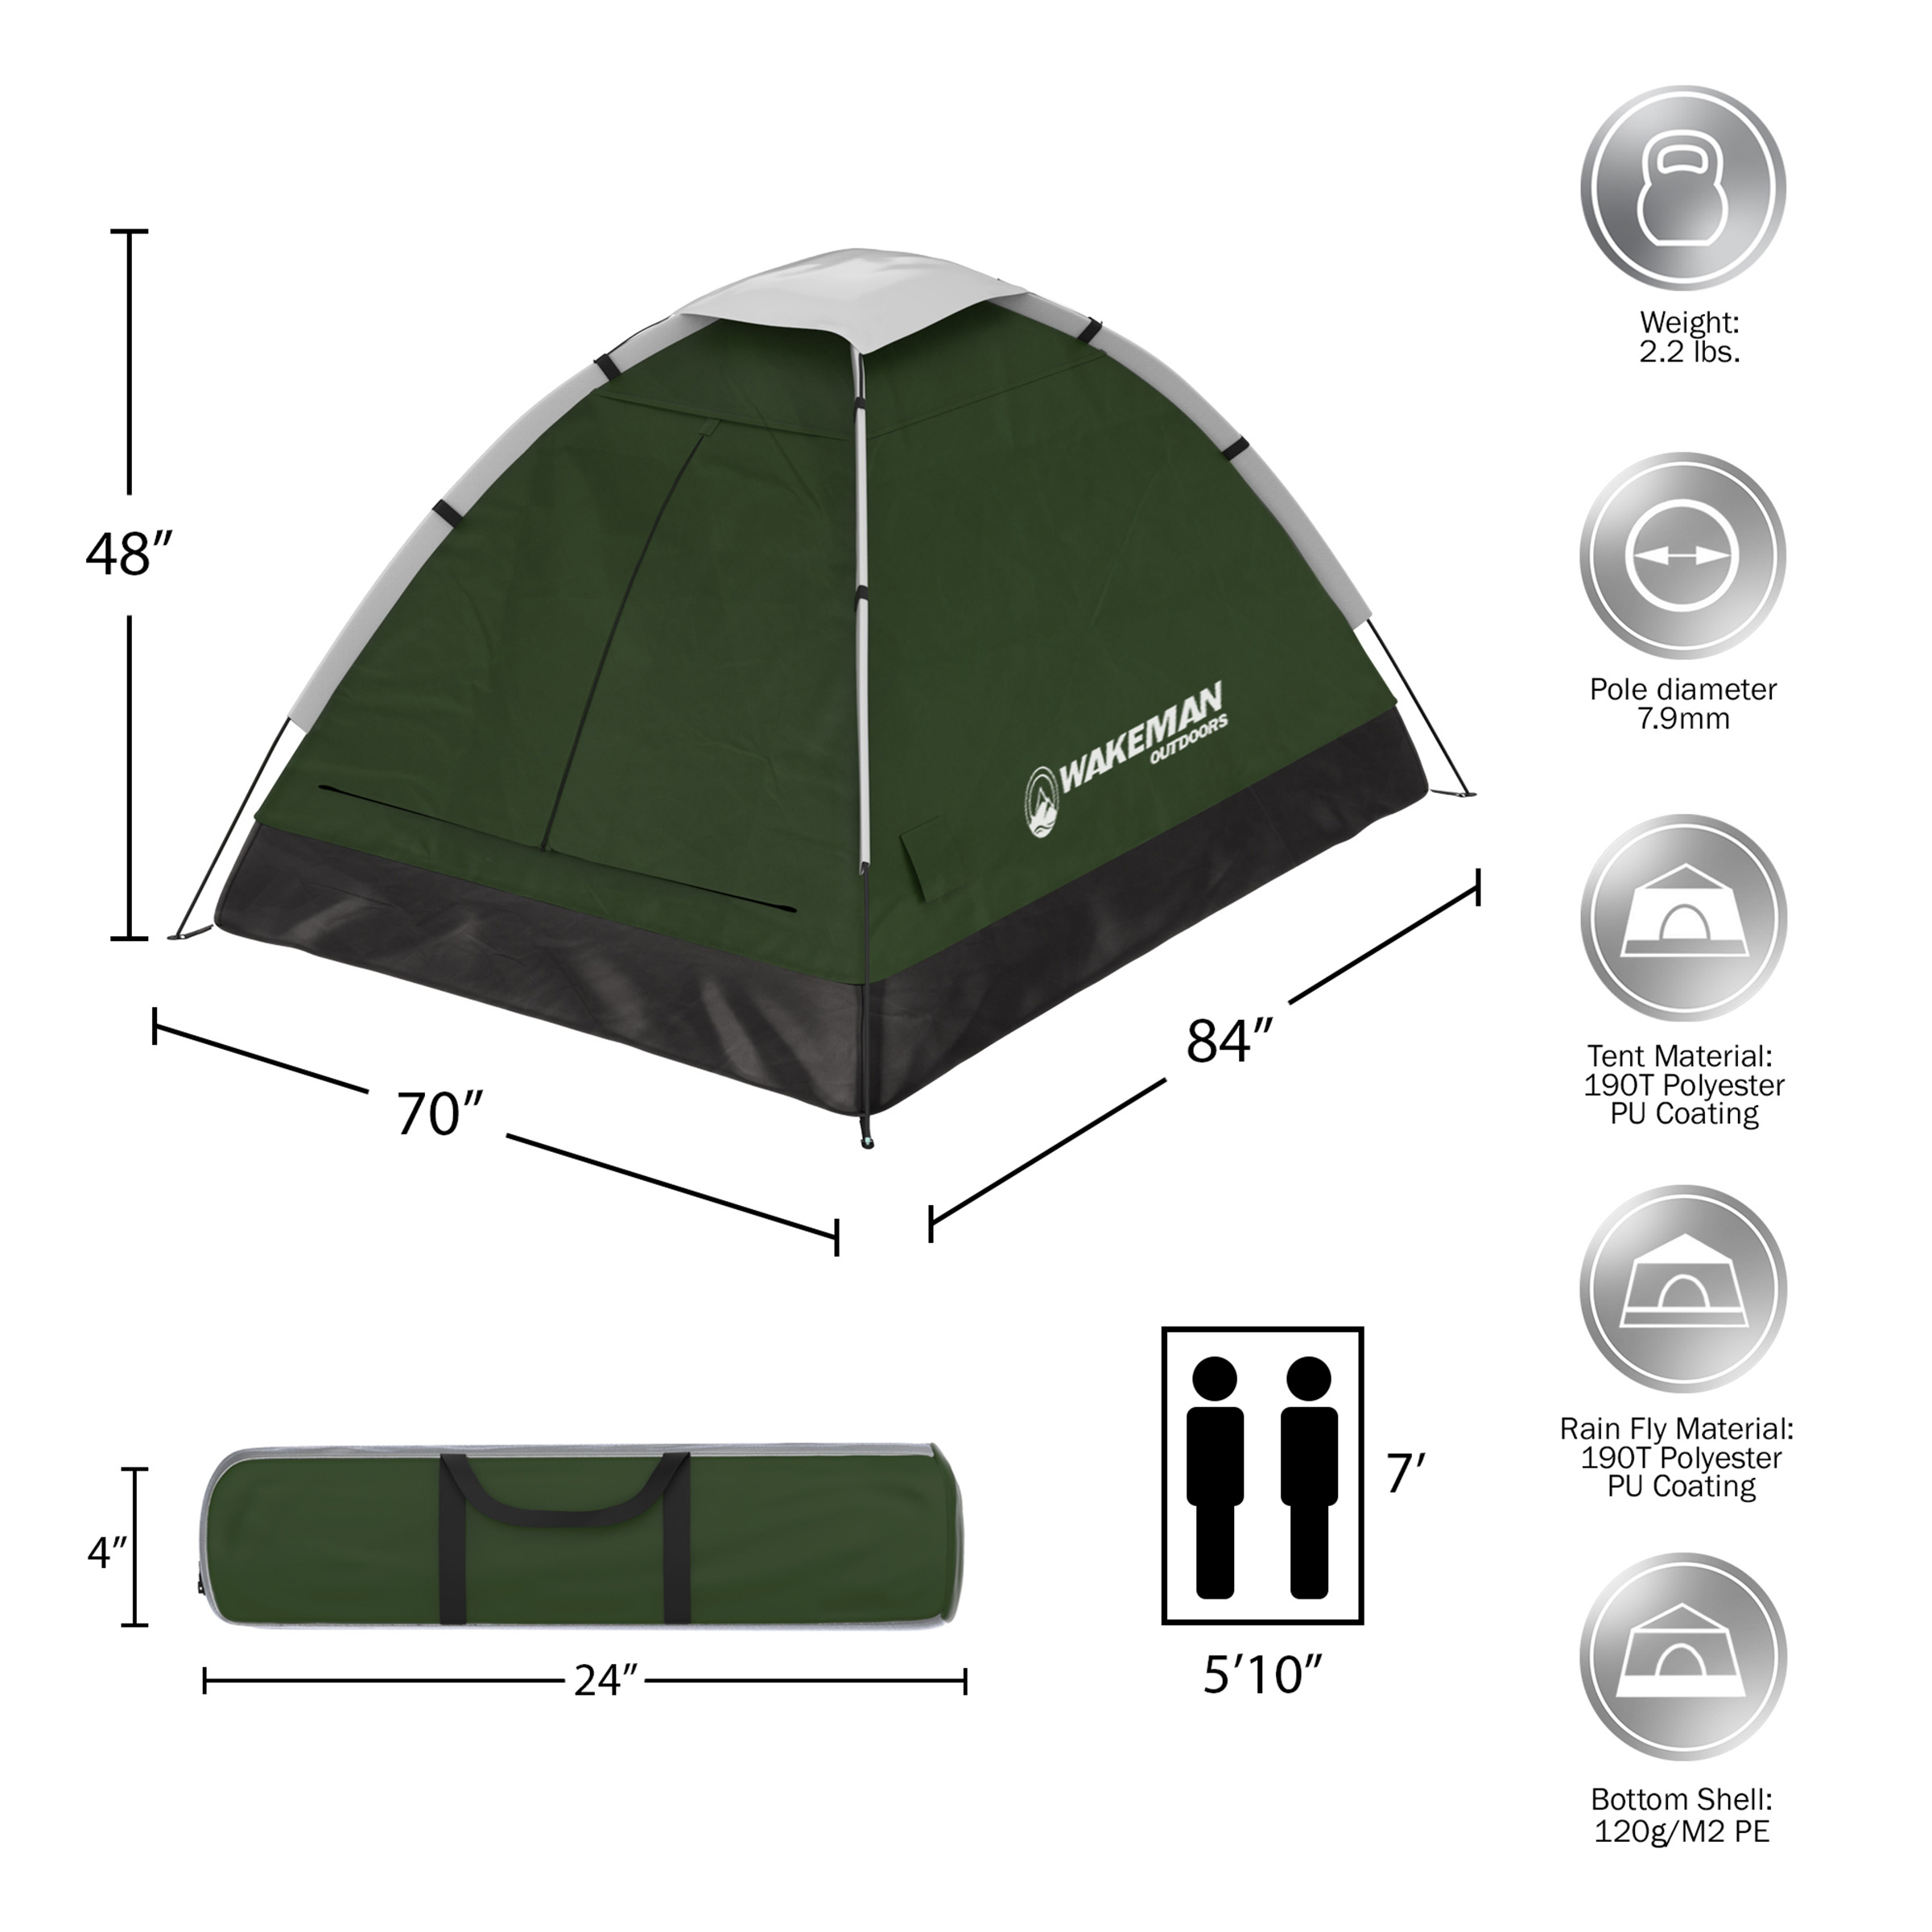 2-Person Dome Tent- Rain Fly & Carry Bag- Easy Set Up-Great for Camping, Backpacking, Hiking & Outdoor Music Festivals by Wakeman Outdoors - image 4 of 8